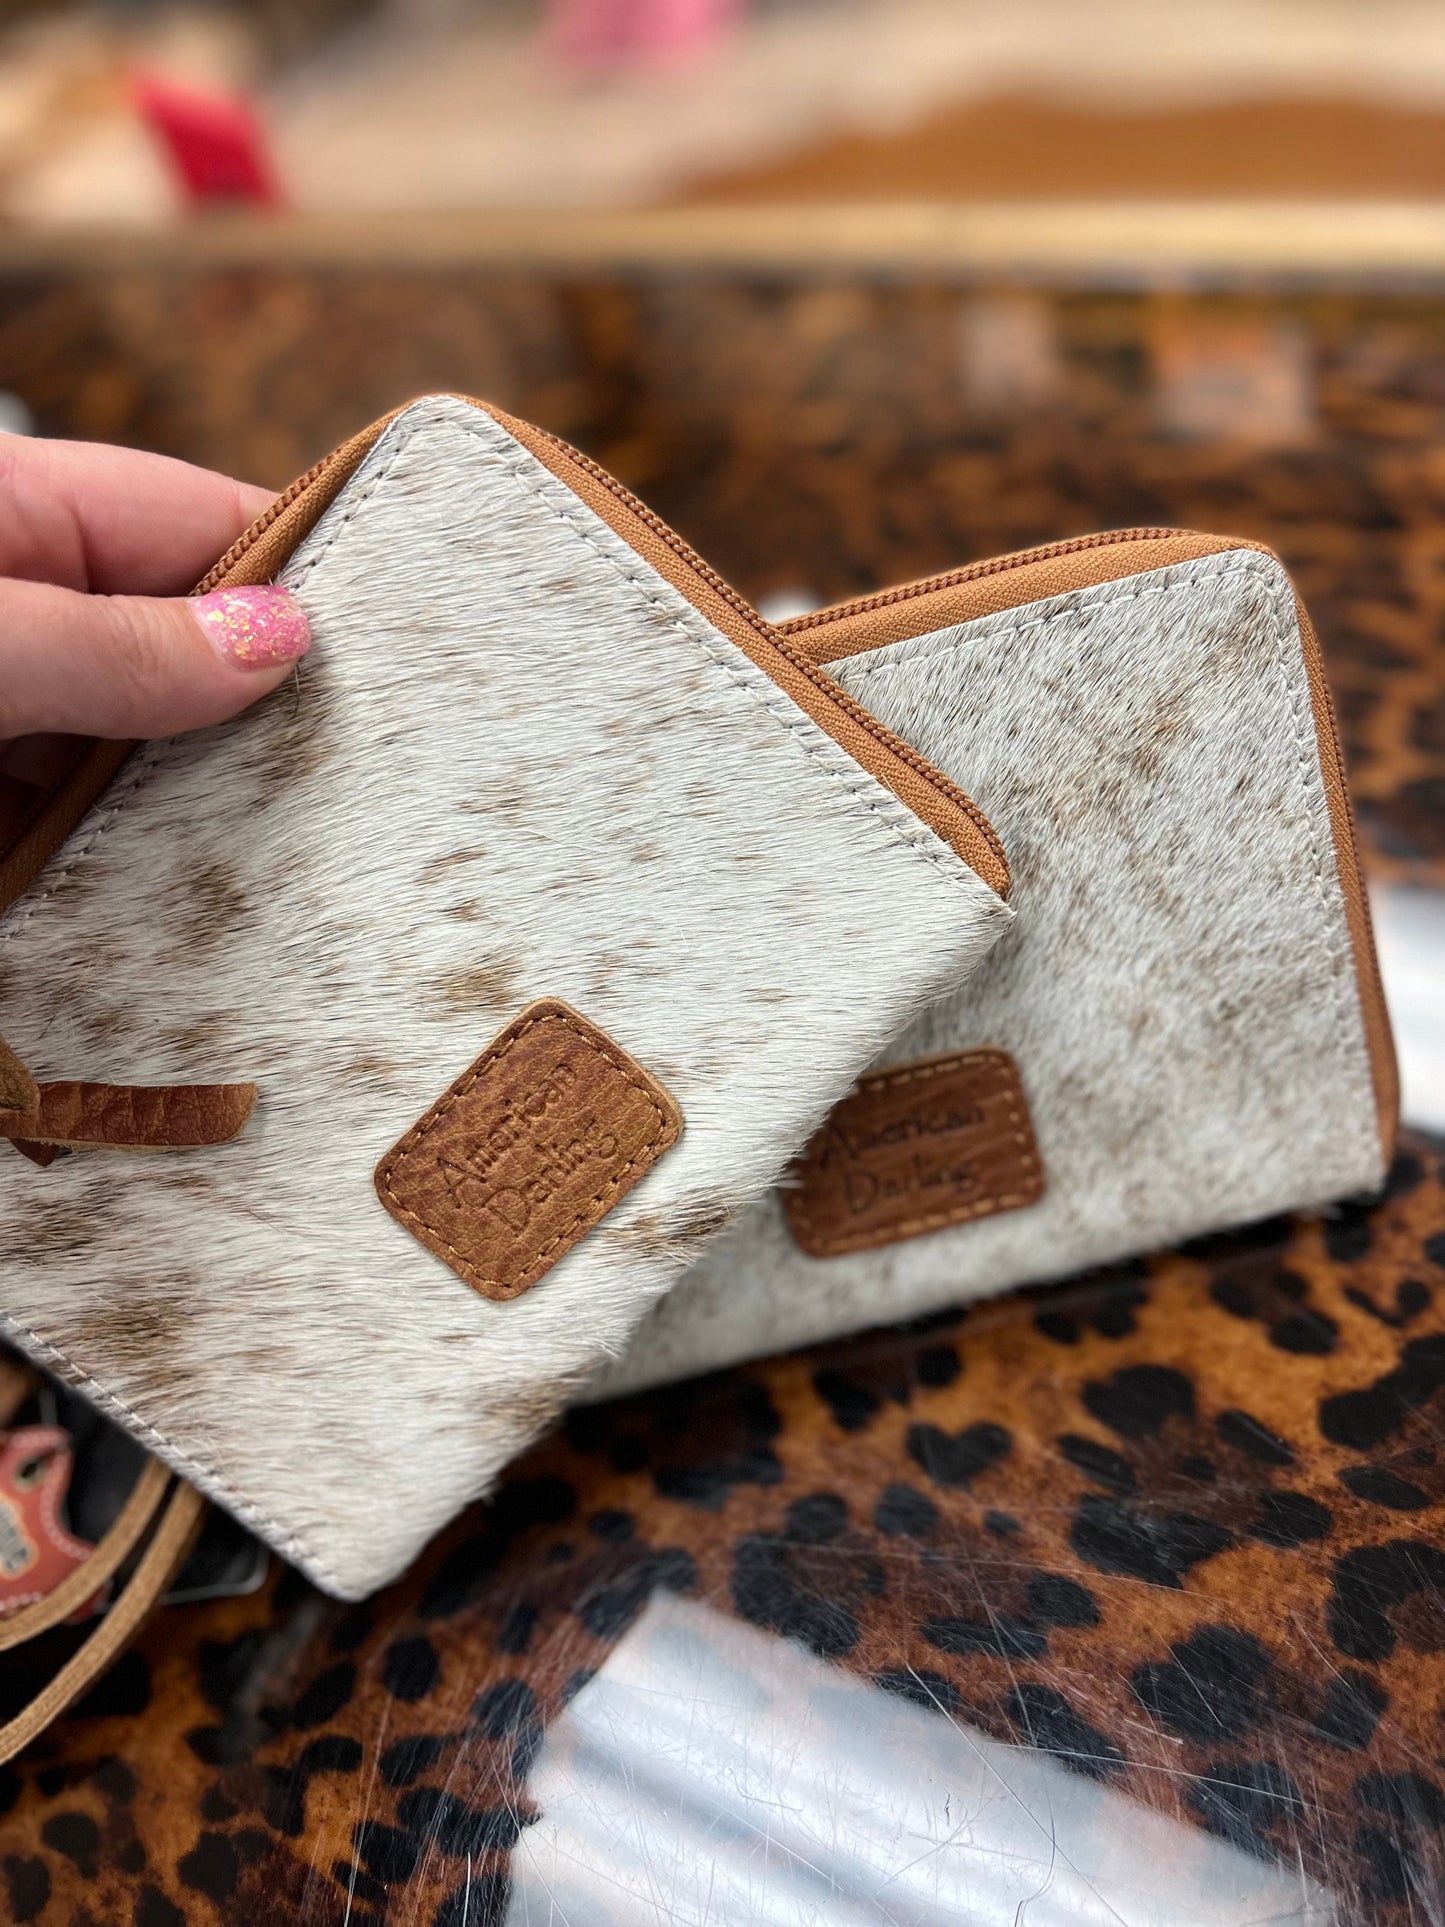 All-In-One Wristlet